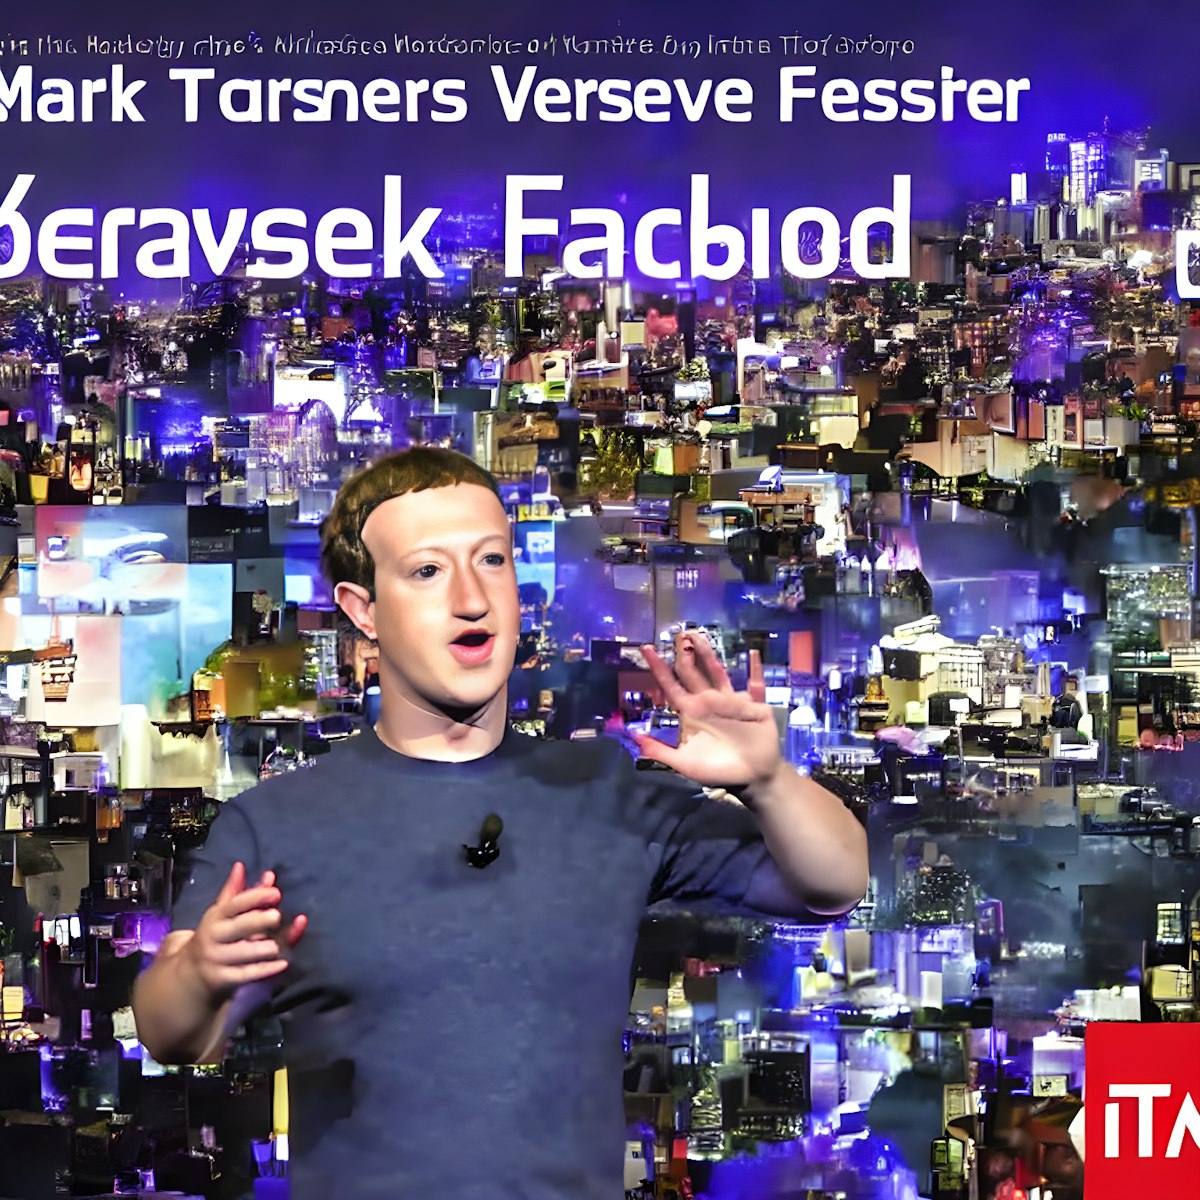 featured image - Mark Zuckerberg’s Metaverse: Zuck’s Decade-old Obsession with Virtual Reality 